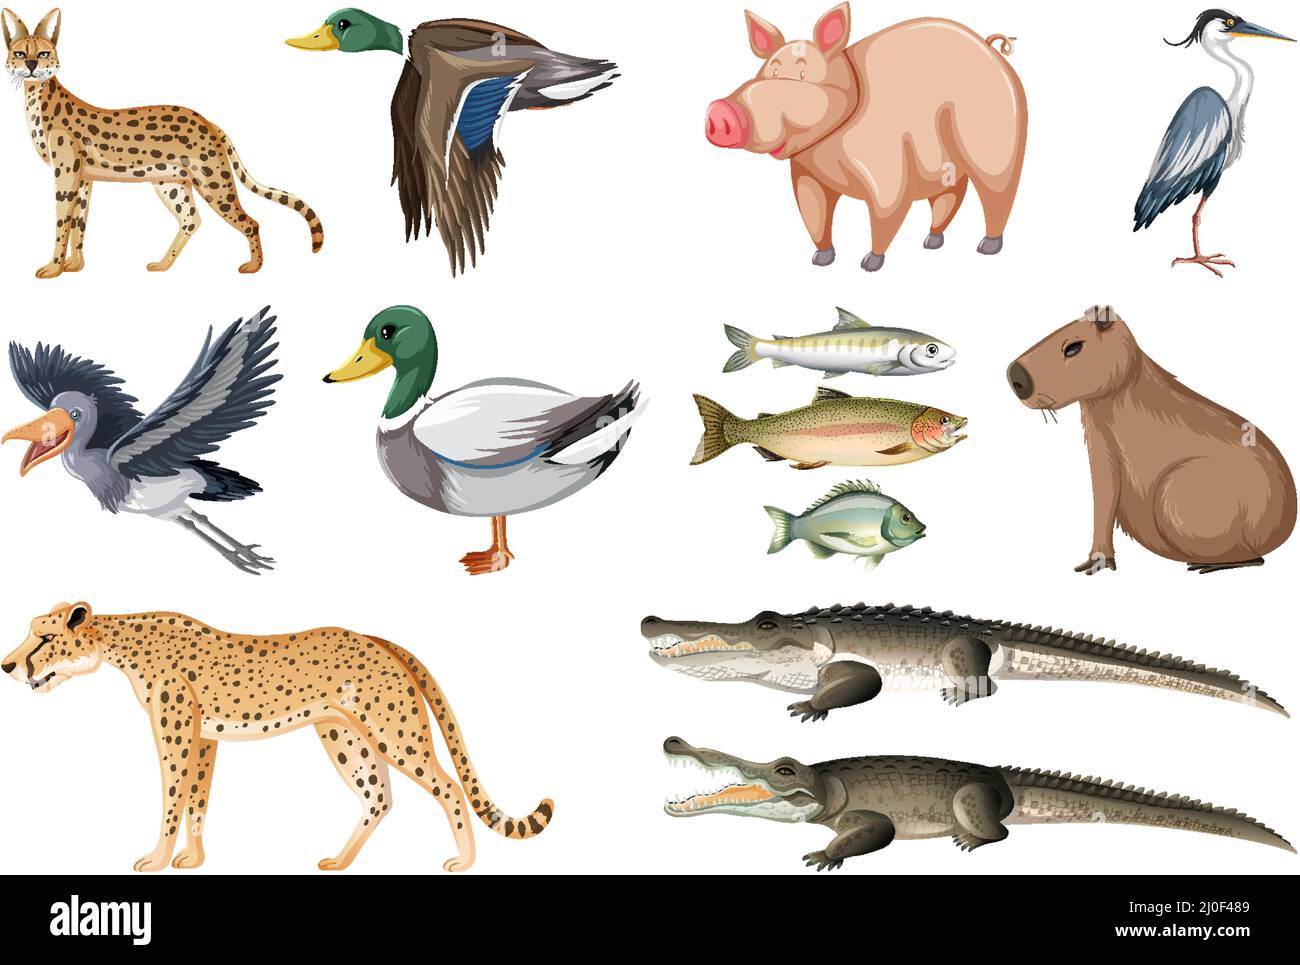 Different kinds of animals collection illustration Stock Vector